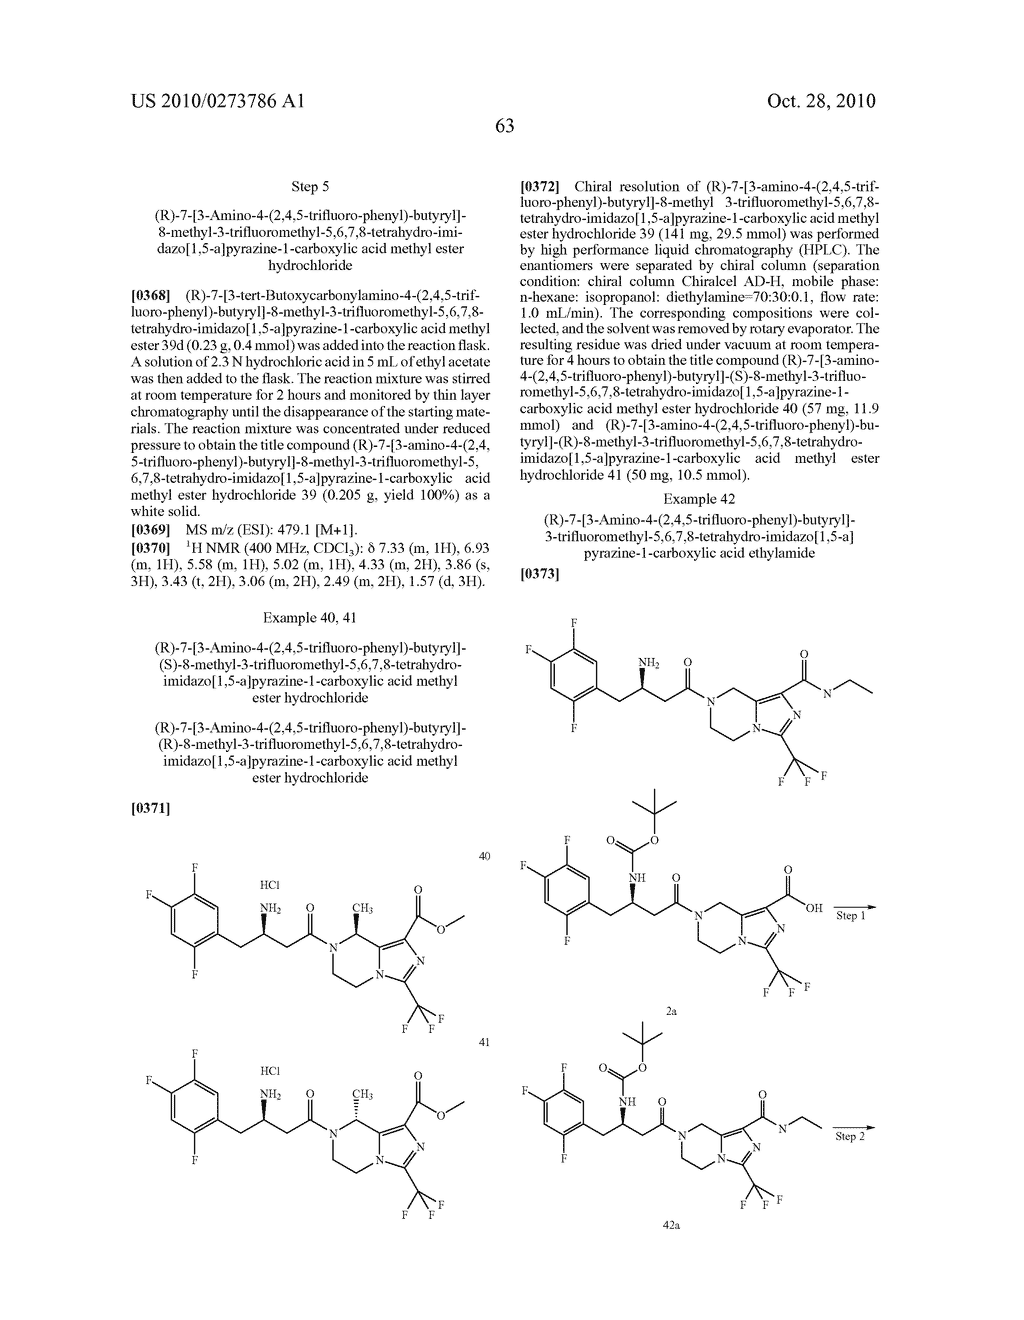 TETRAHYDRO-IMIDAZ0[1,5-A]PYRAZINE DERIVATIVES, PREPARATION PROCESS AND MEDICINAL USE THEREOF - diagram, schematic, and image 64